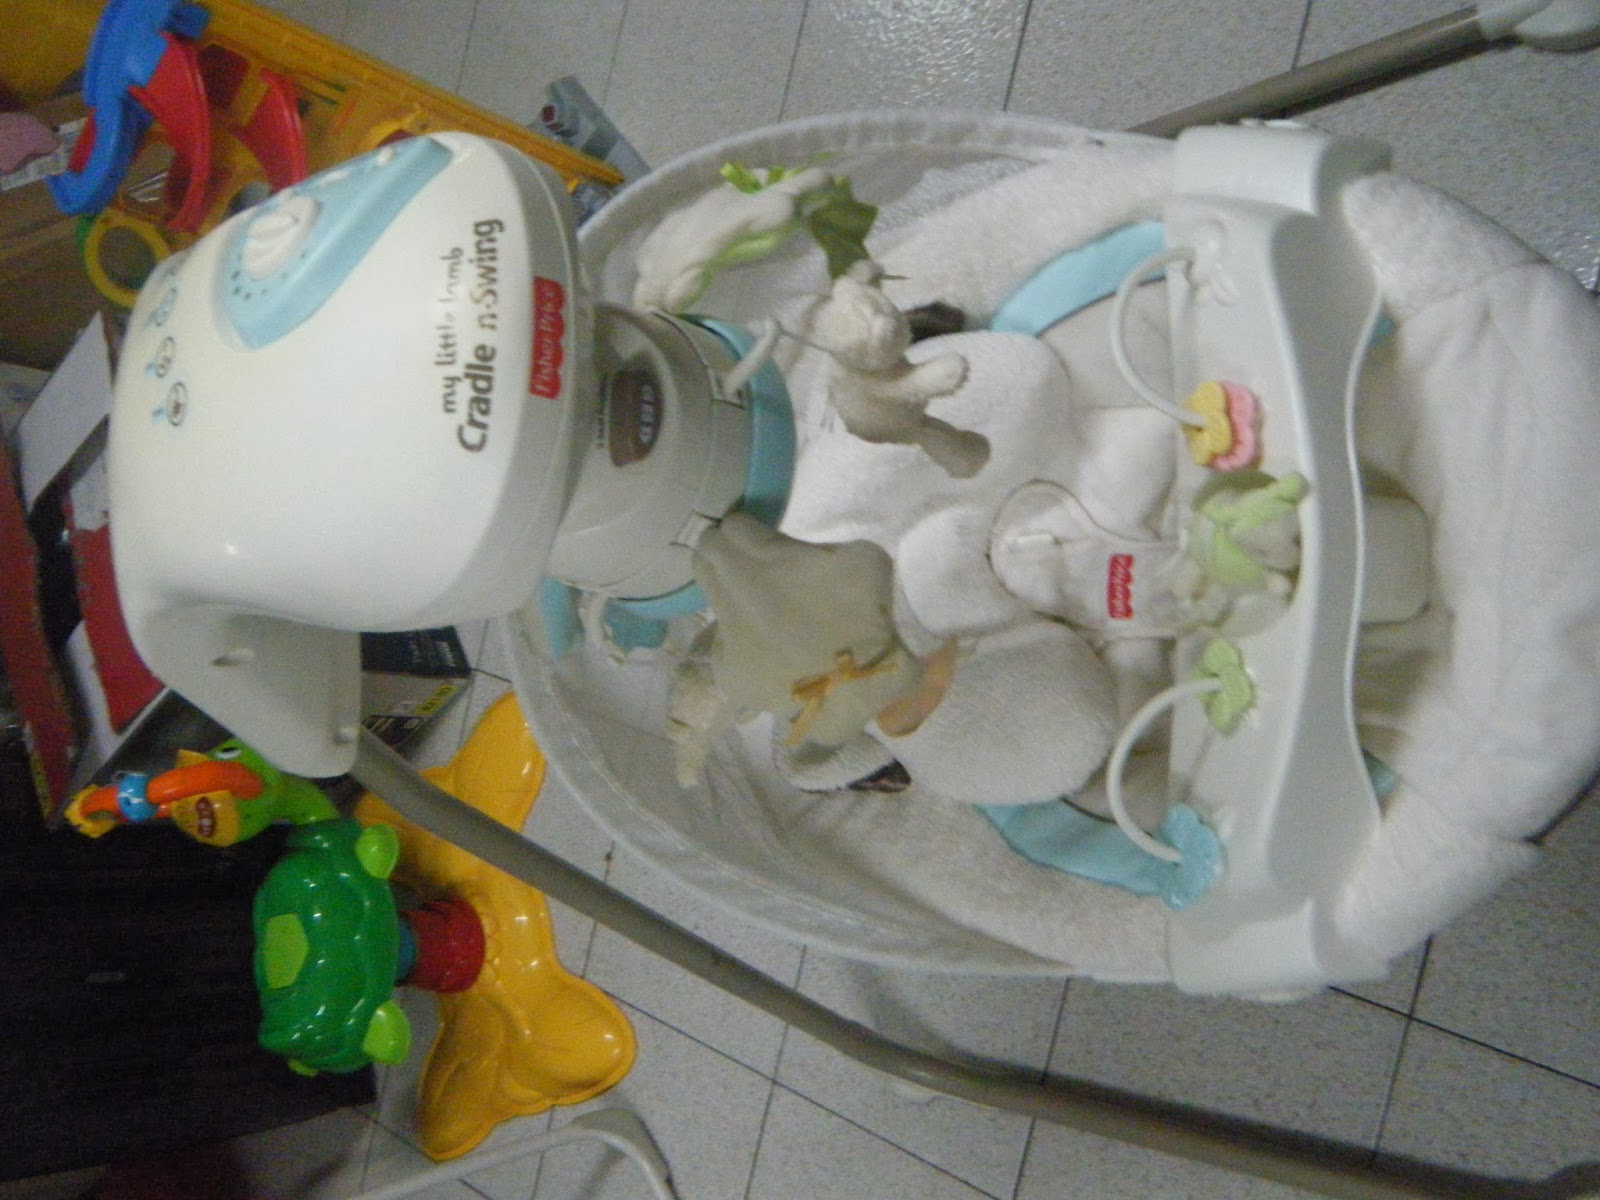 MommysLove4Baby143 Fisher Price Cradle n Swing, My Little